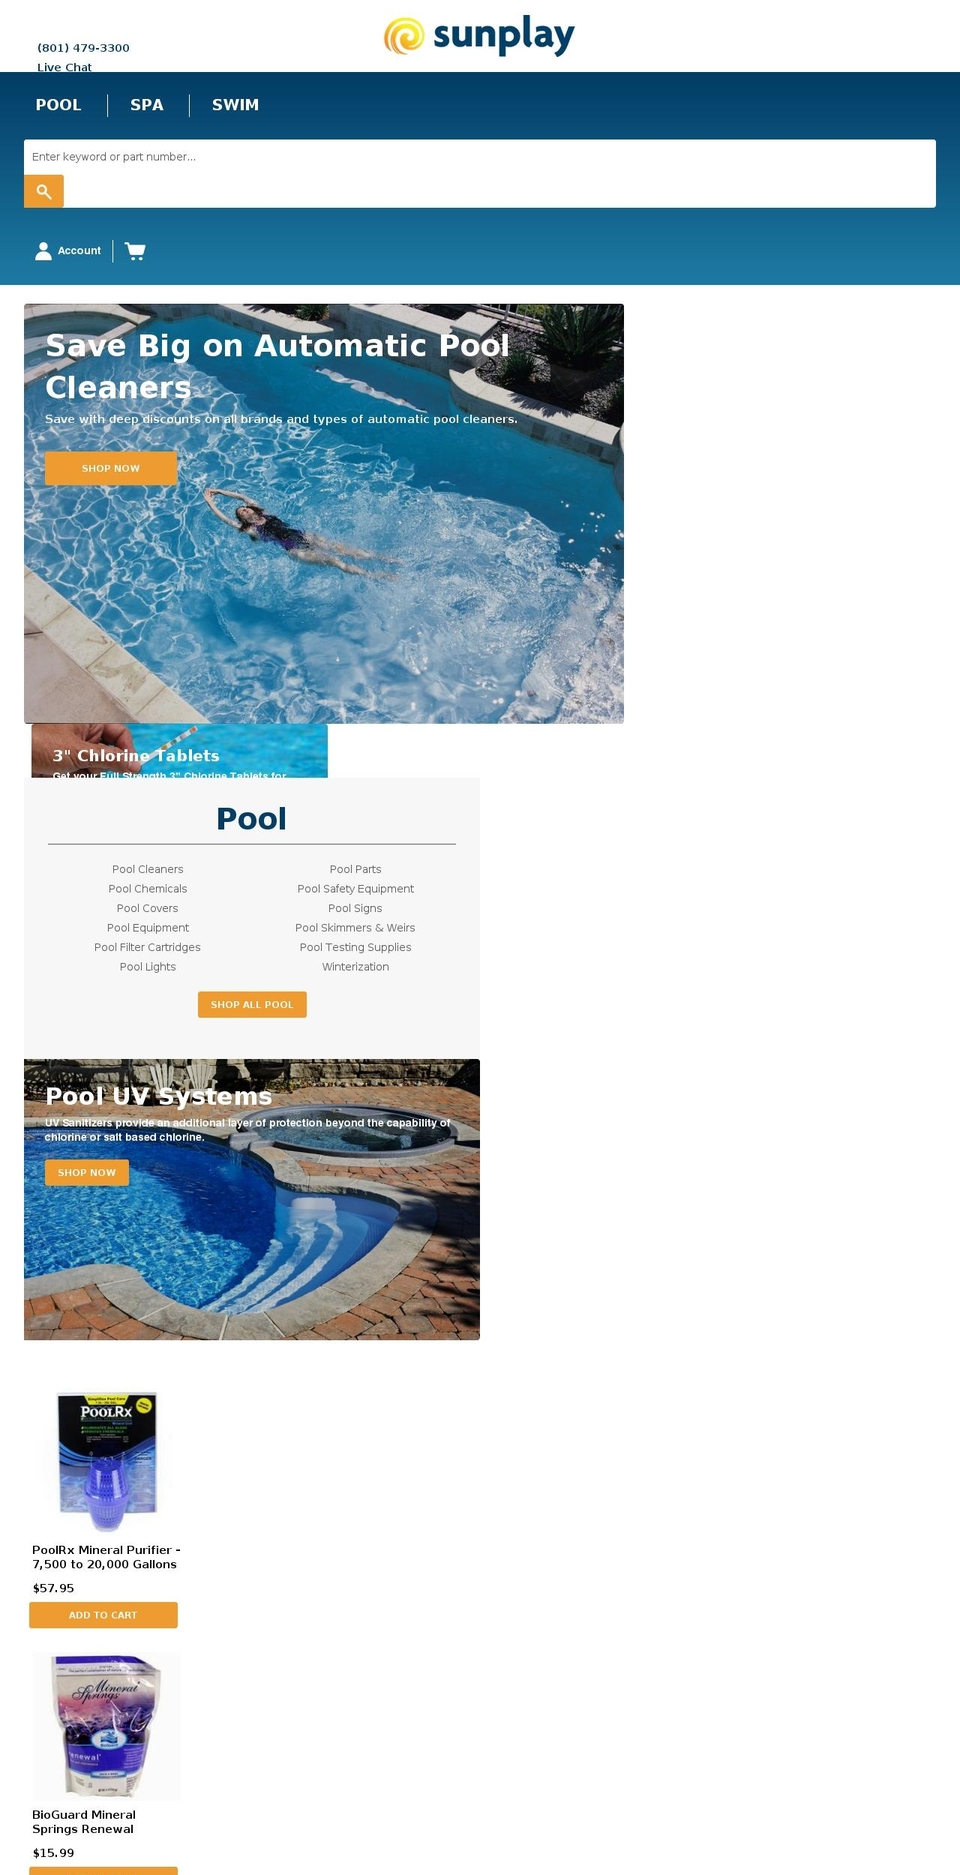 Sunplay v1.0 [Speck - Collection] Shopify theme site example sunplay.systems